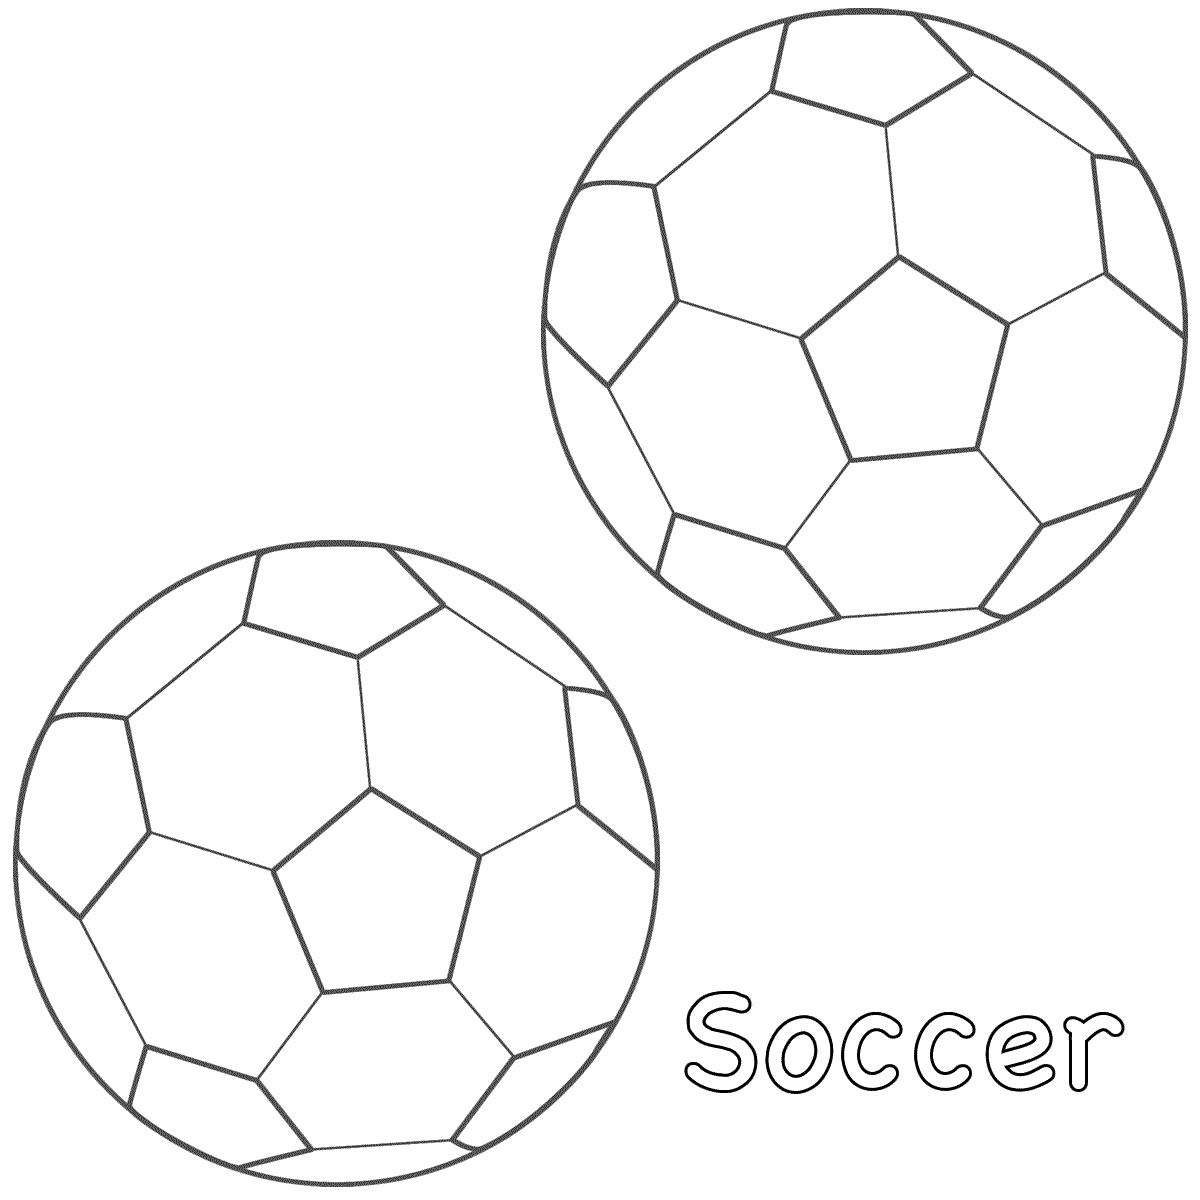 Soccer Balls - Coloring Page (Sports)